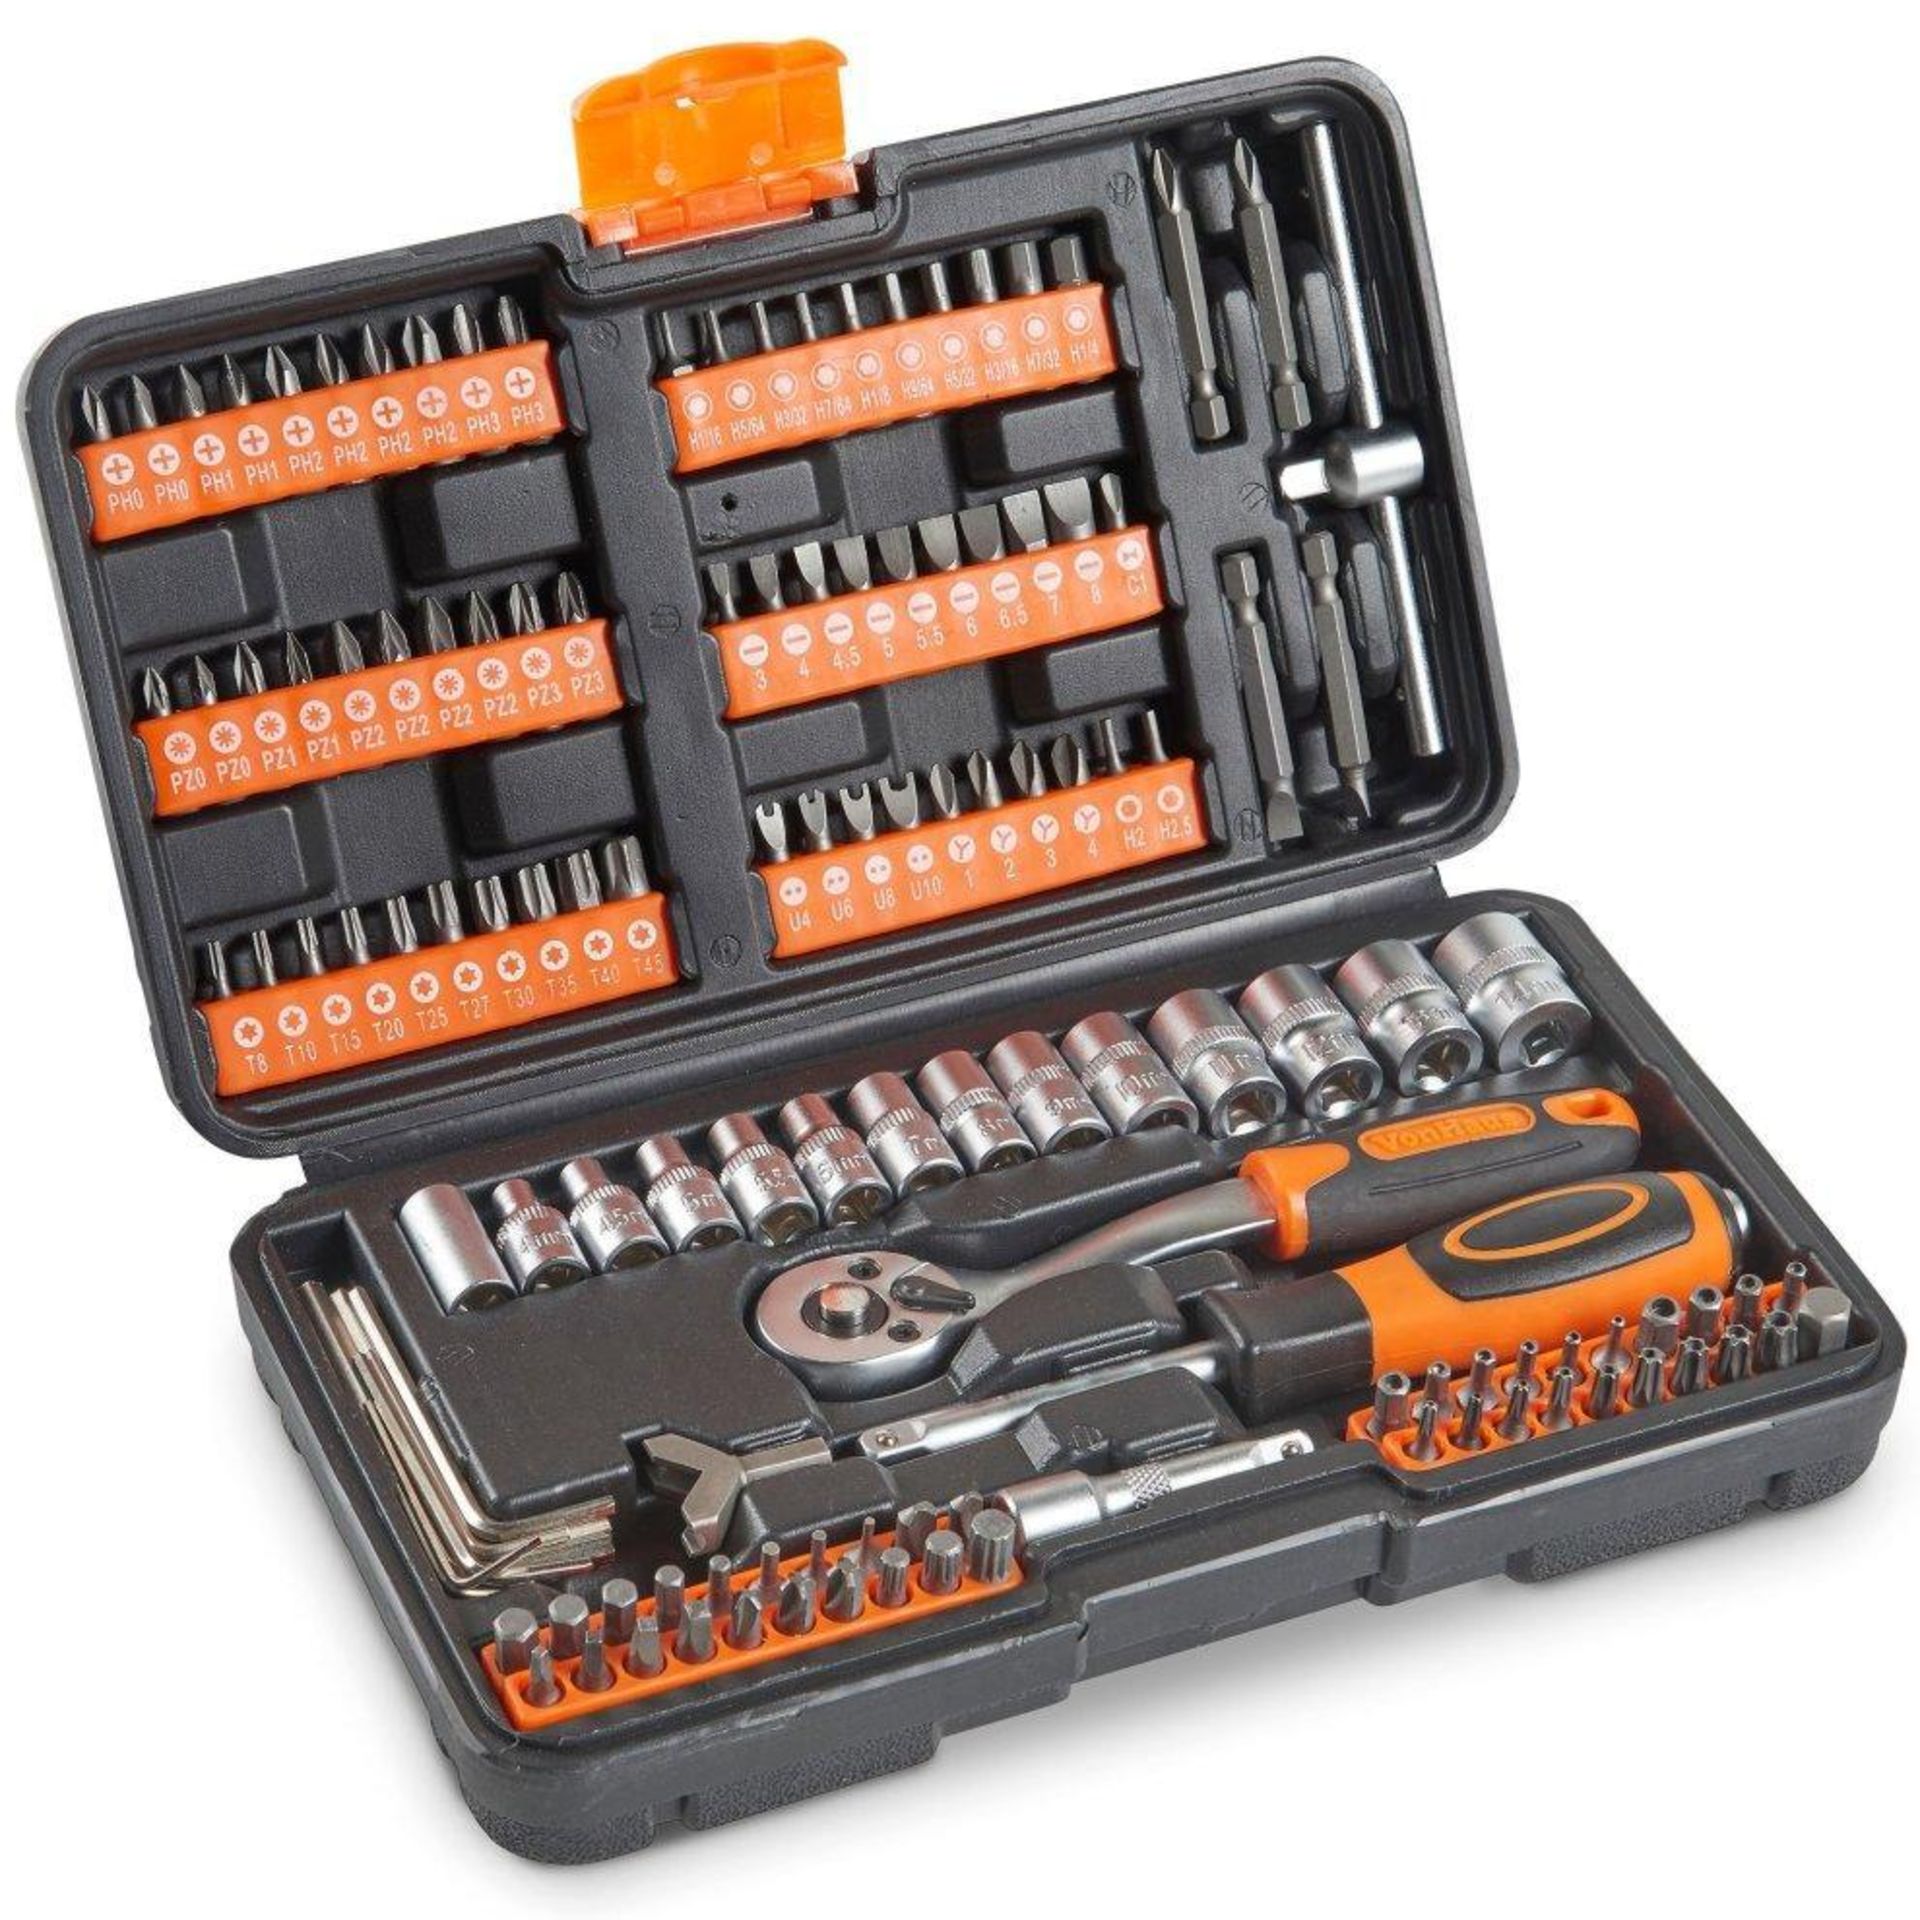 130pc Socket + Bit Set - ER51.Be prepared for the unexpected with the Luxury 130pc Socket + Bit Set.